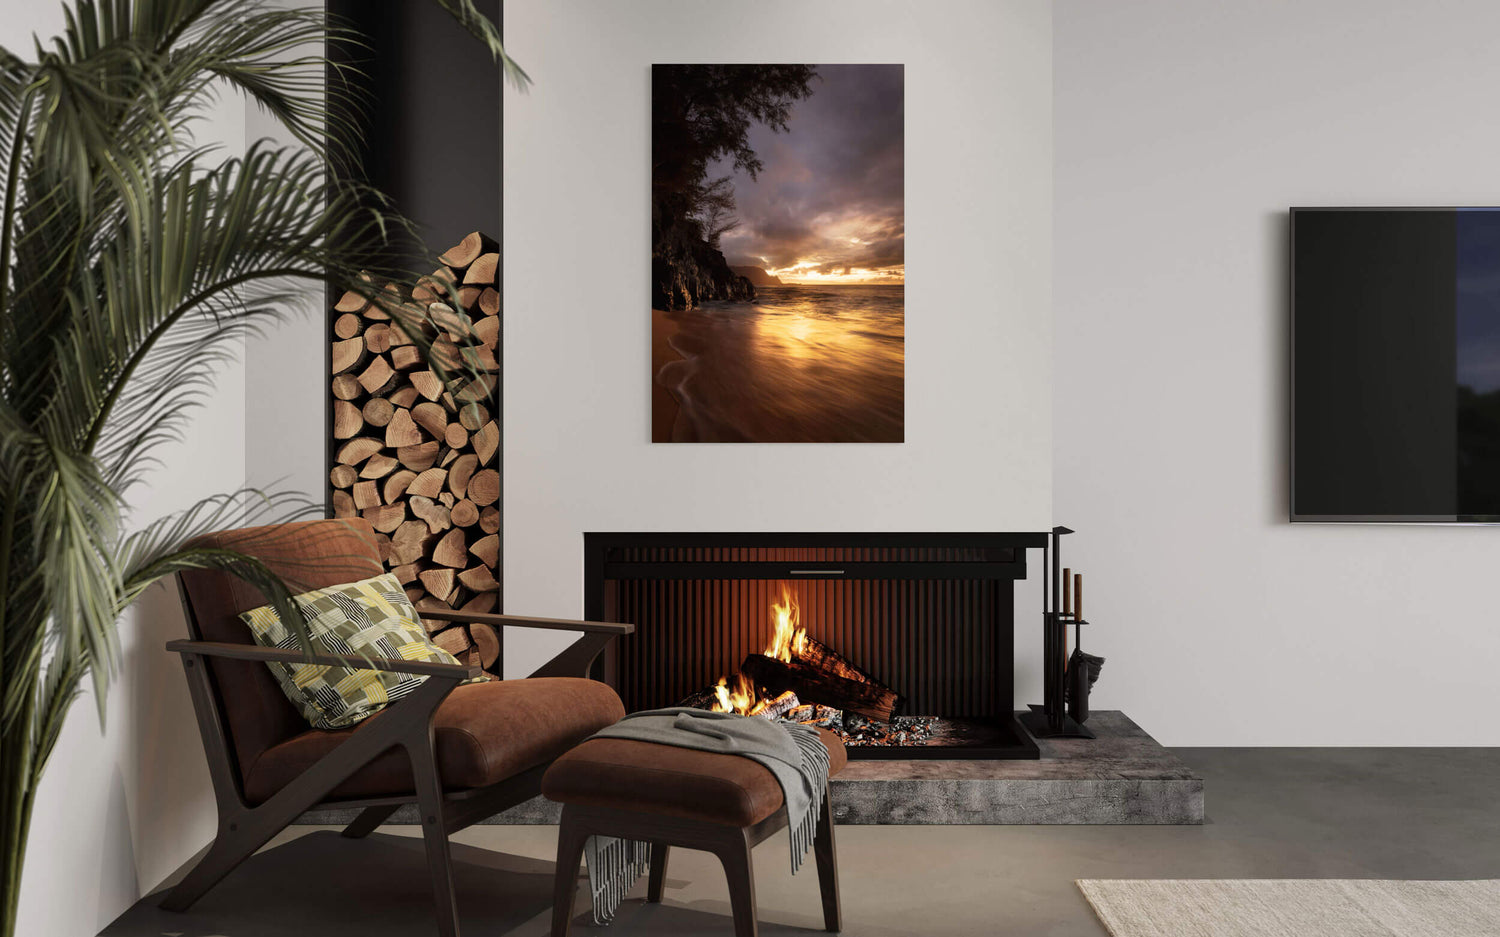 A Hideaway Beach picture from one of the best beaches on Kauai hangs in a living room.